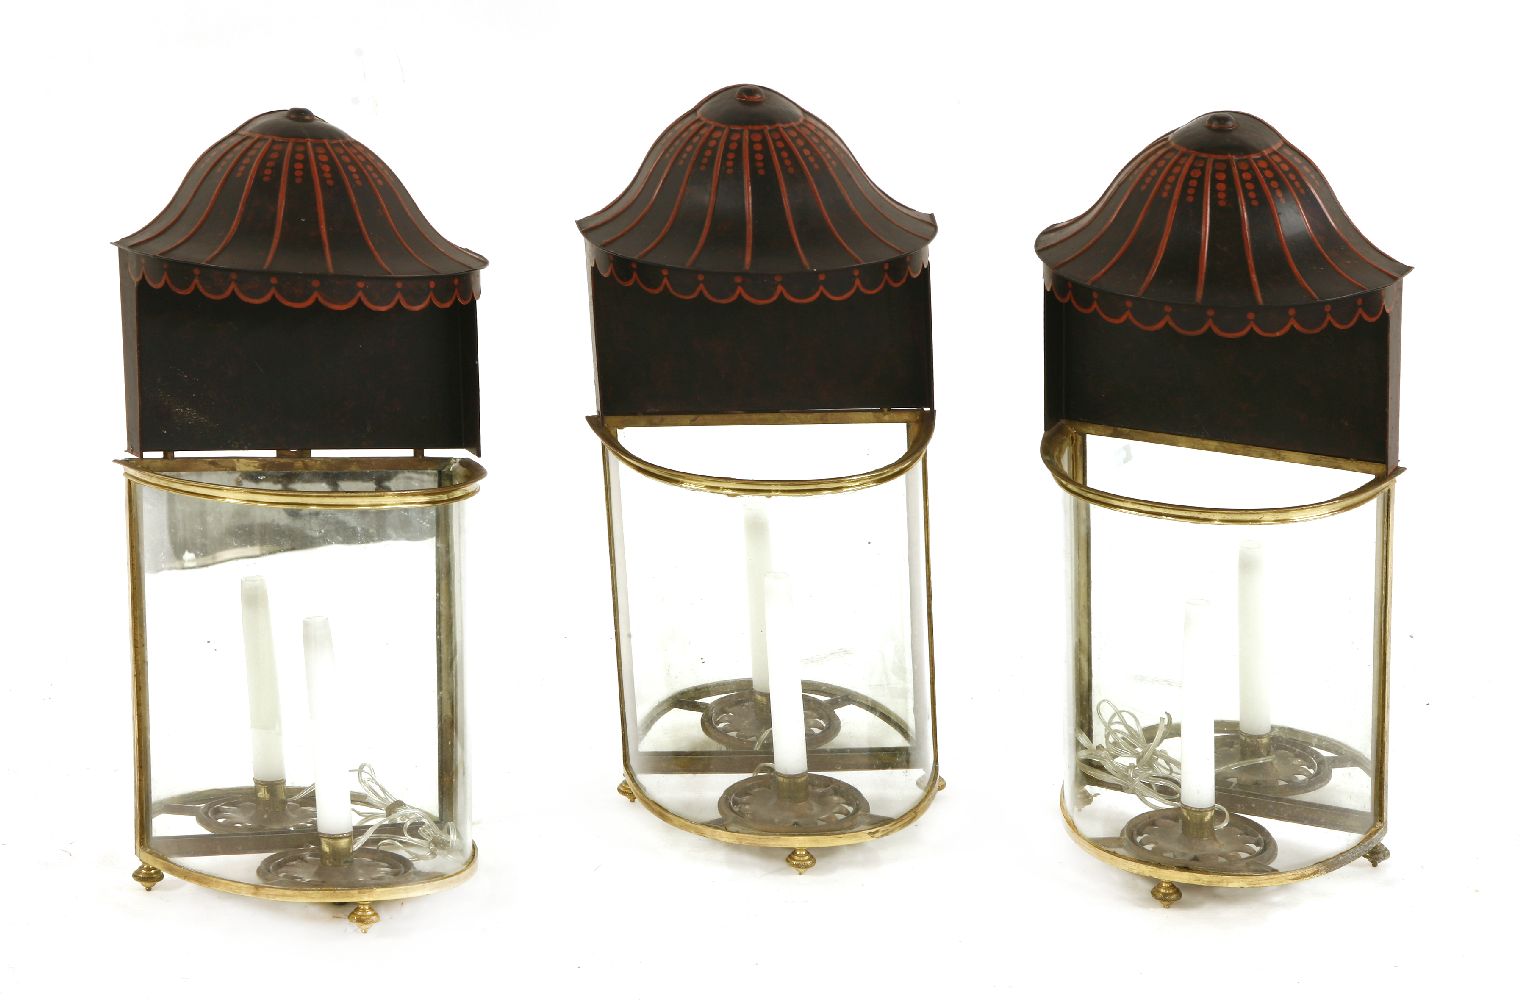 Three gilt metal wall lights,20th century, of demilune shape with mirrored backs and painted metal